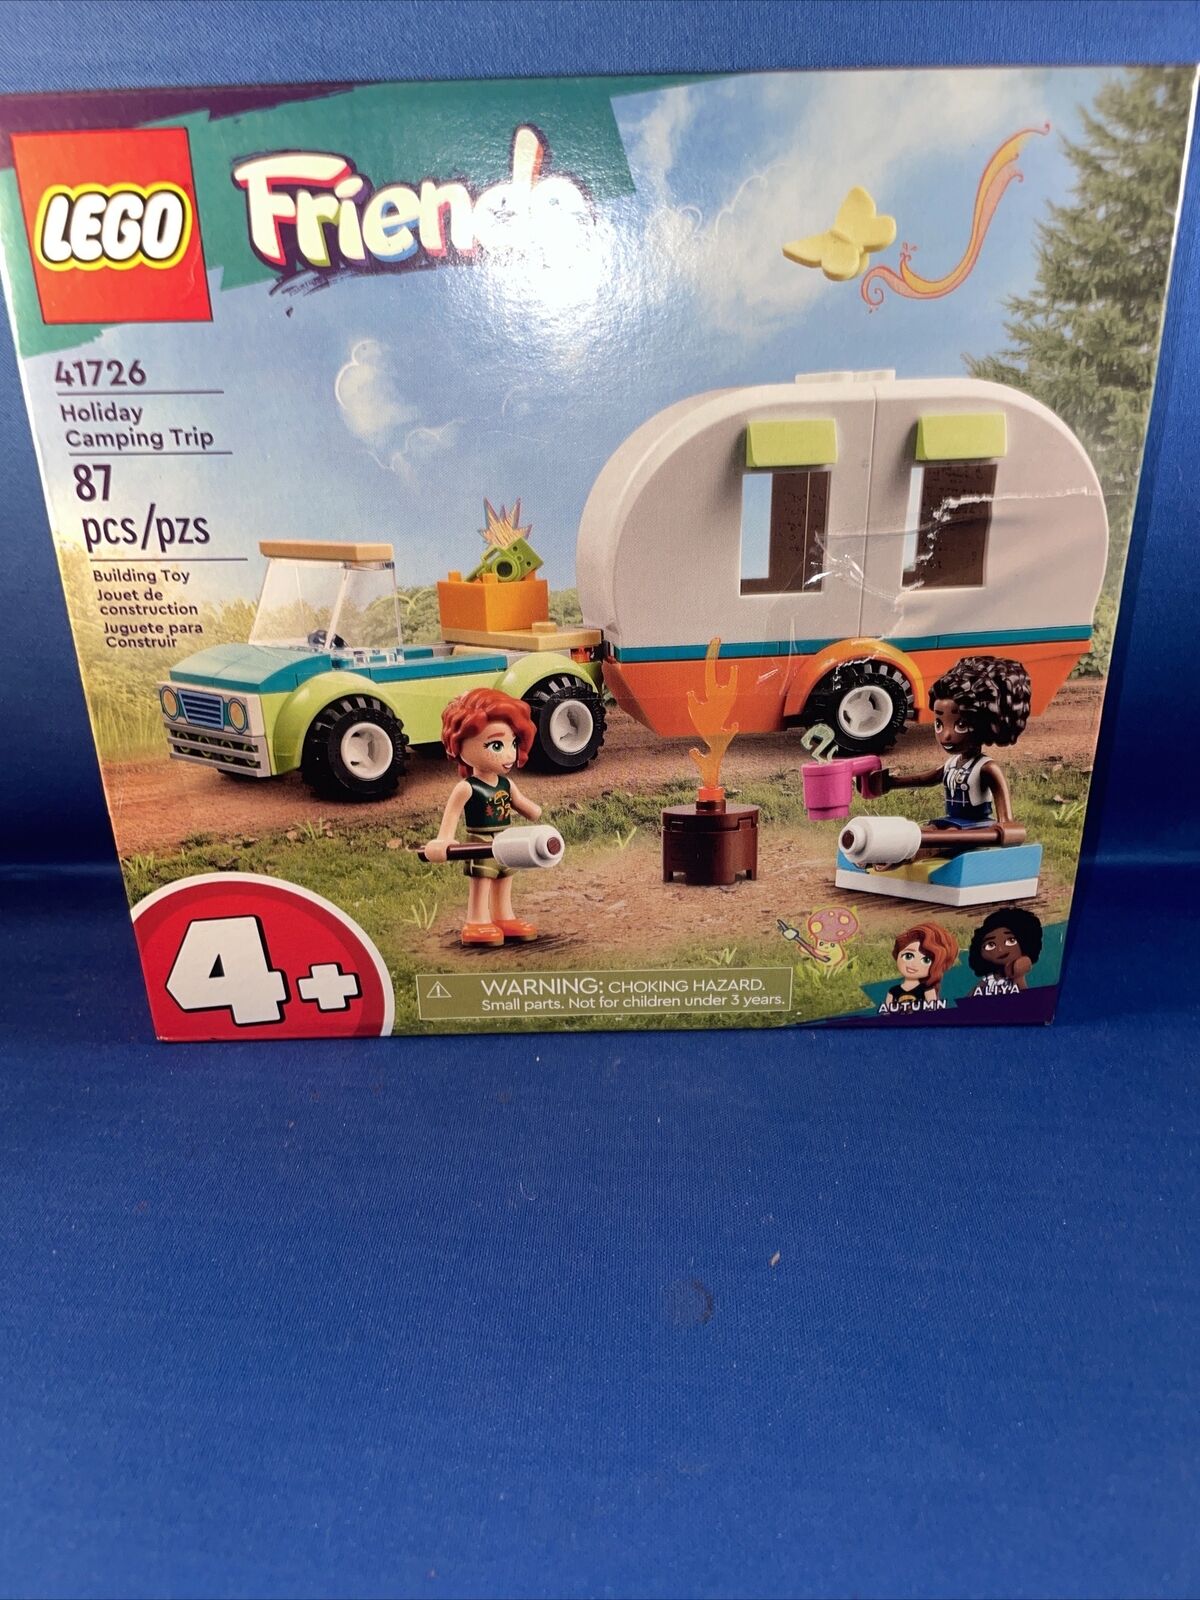 LEGO Friends Holiday Camping Trip 41726 Building Toy Set BRAND NEW